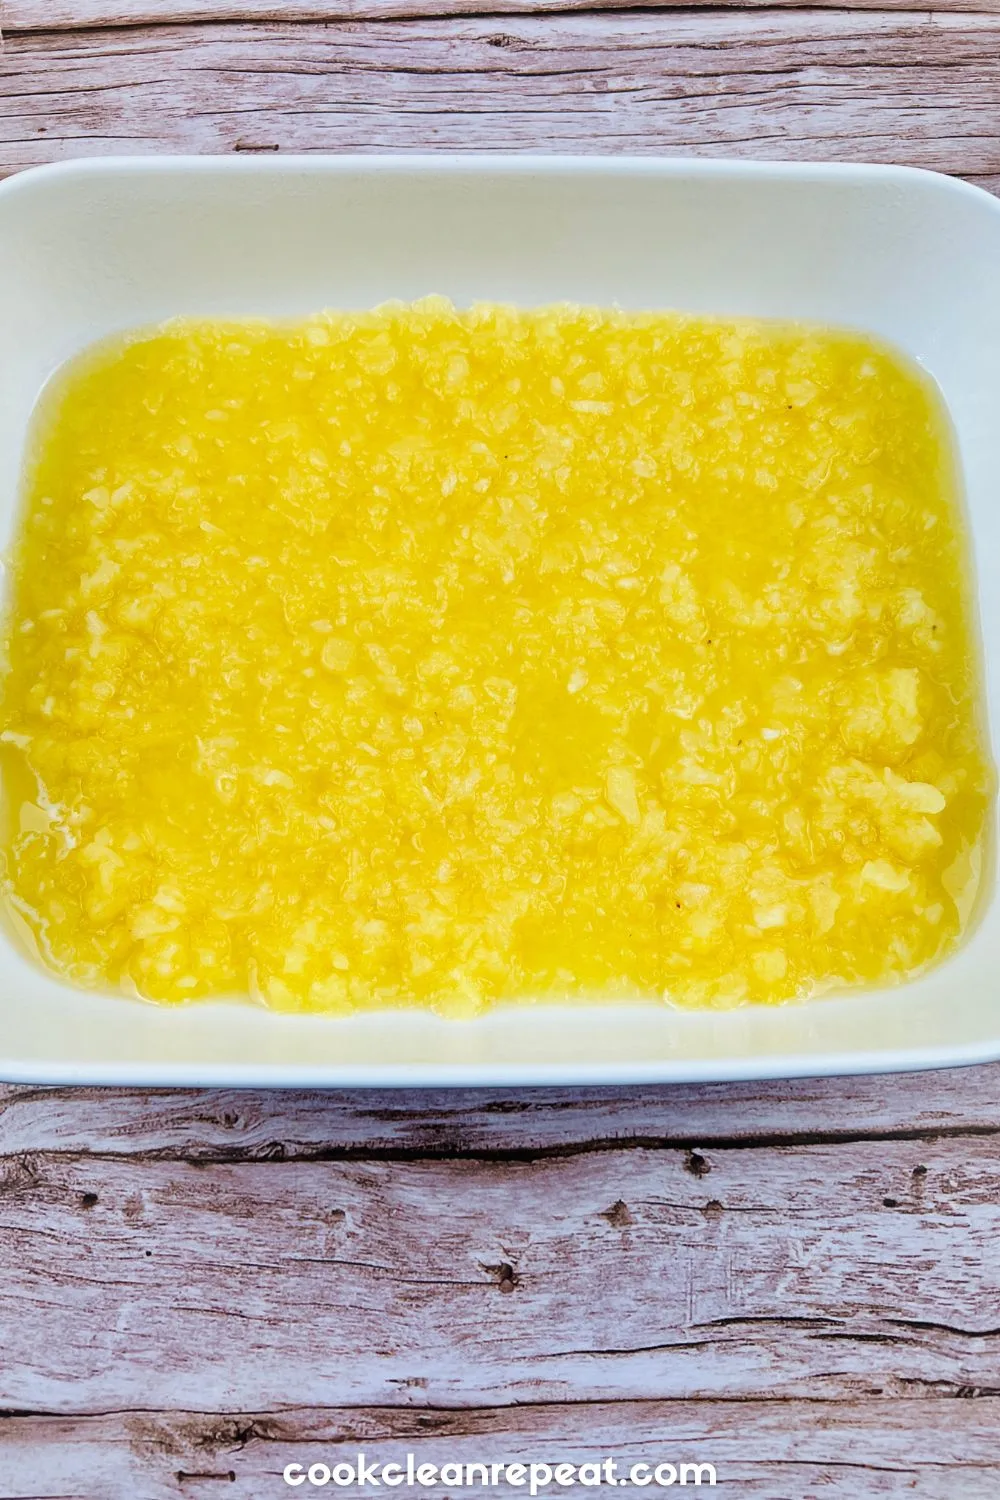 pineapple spread into a baking dish